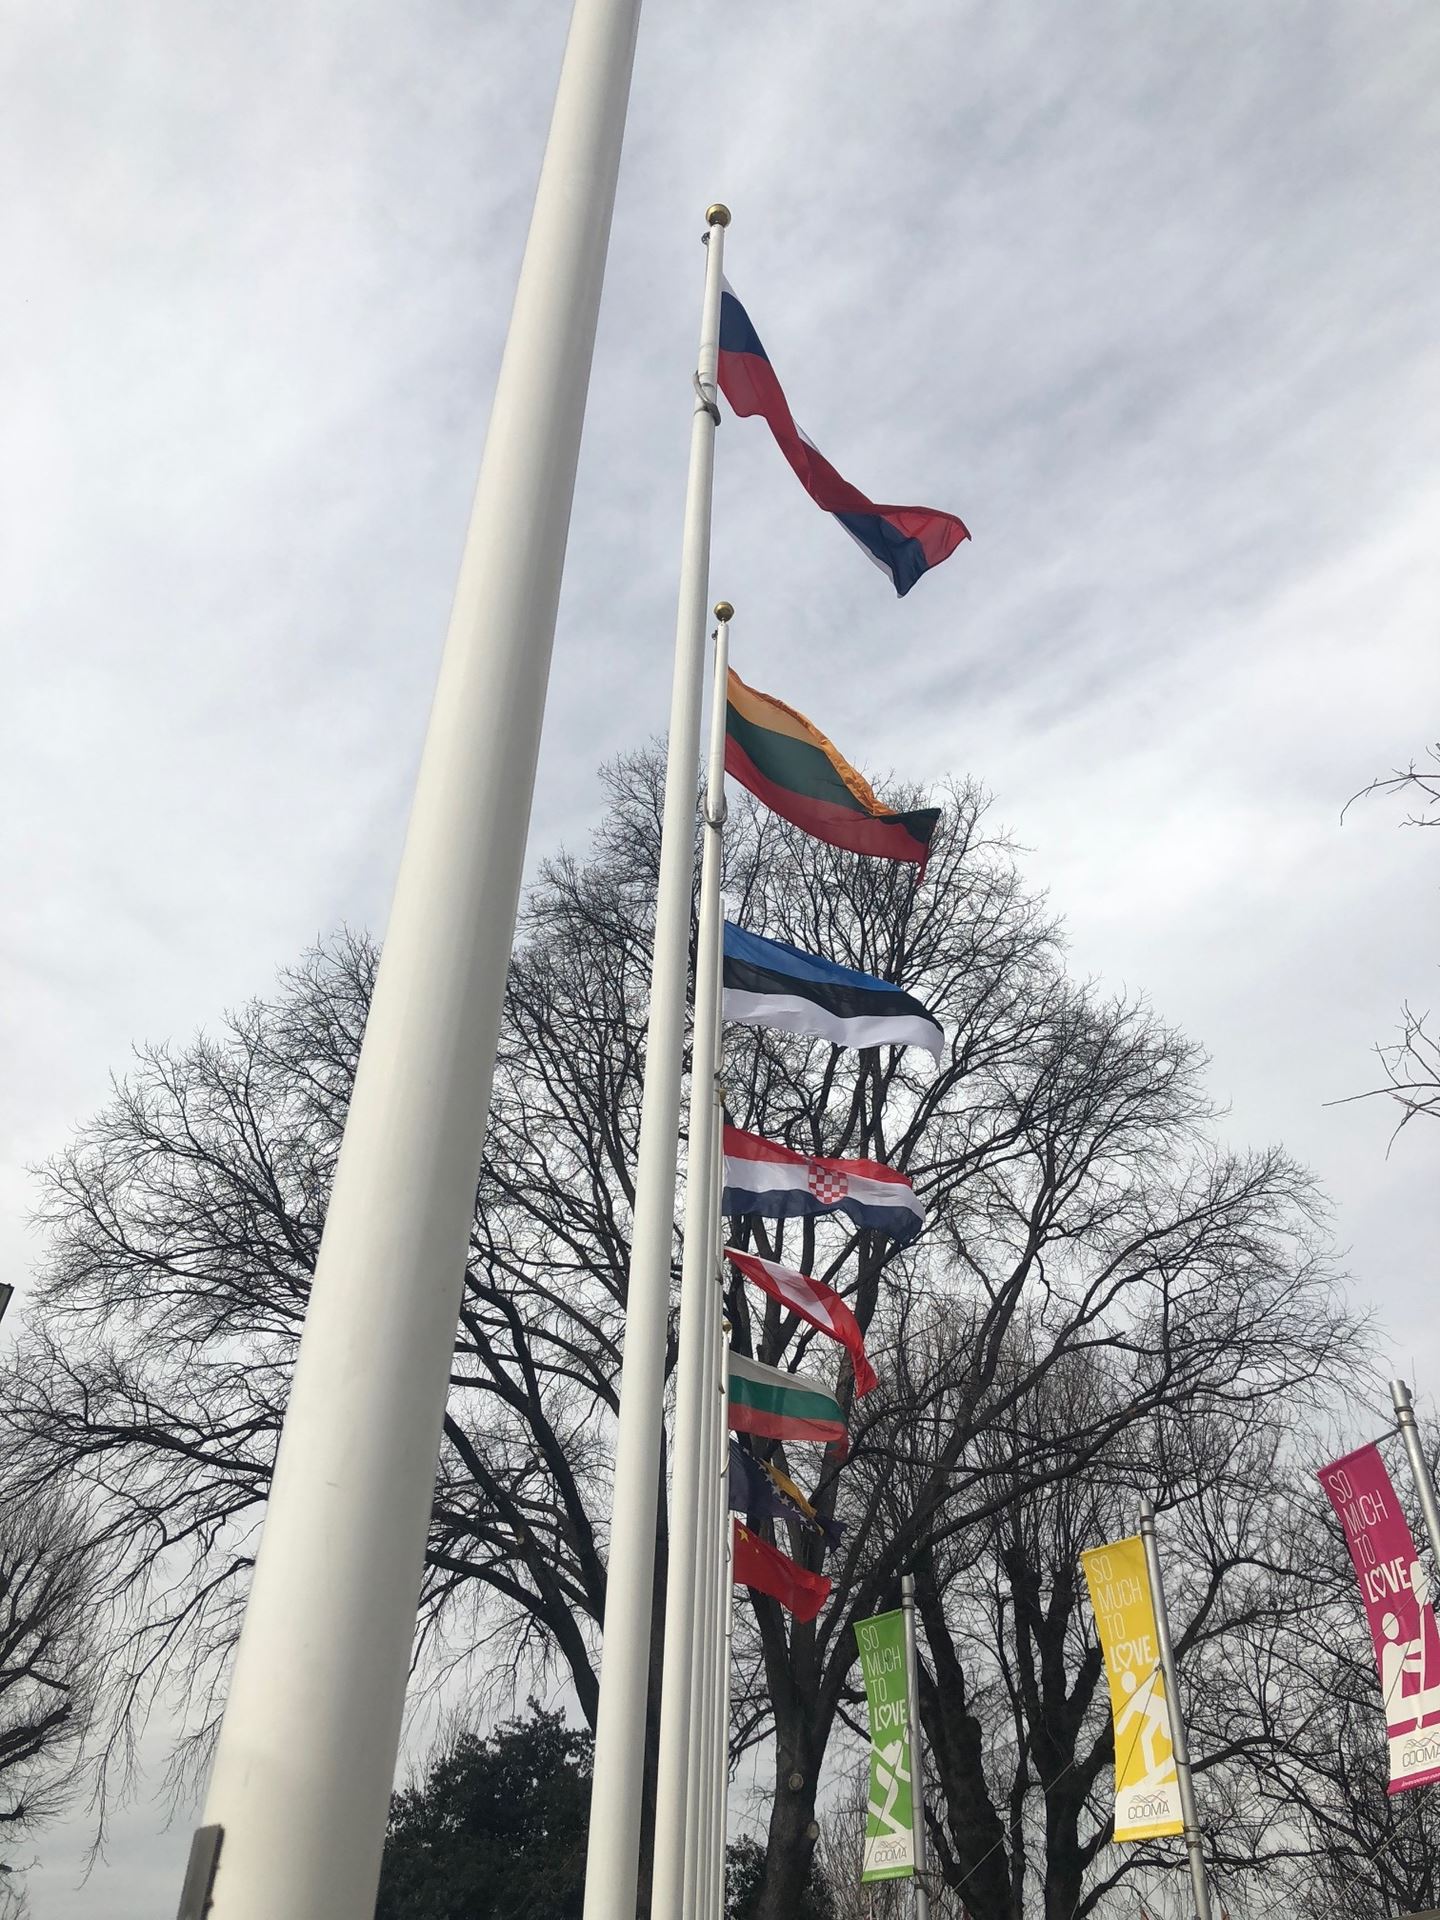 Looking up at some of the flags on Avenue of flags